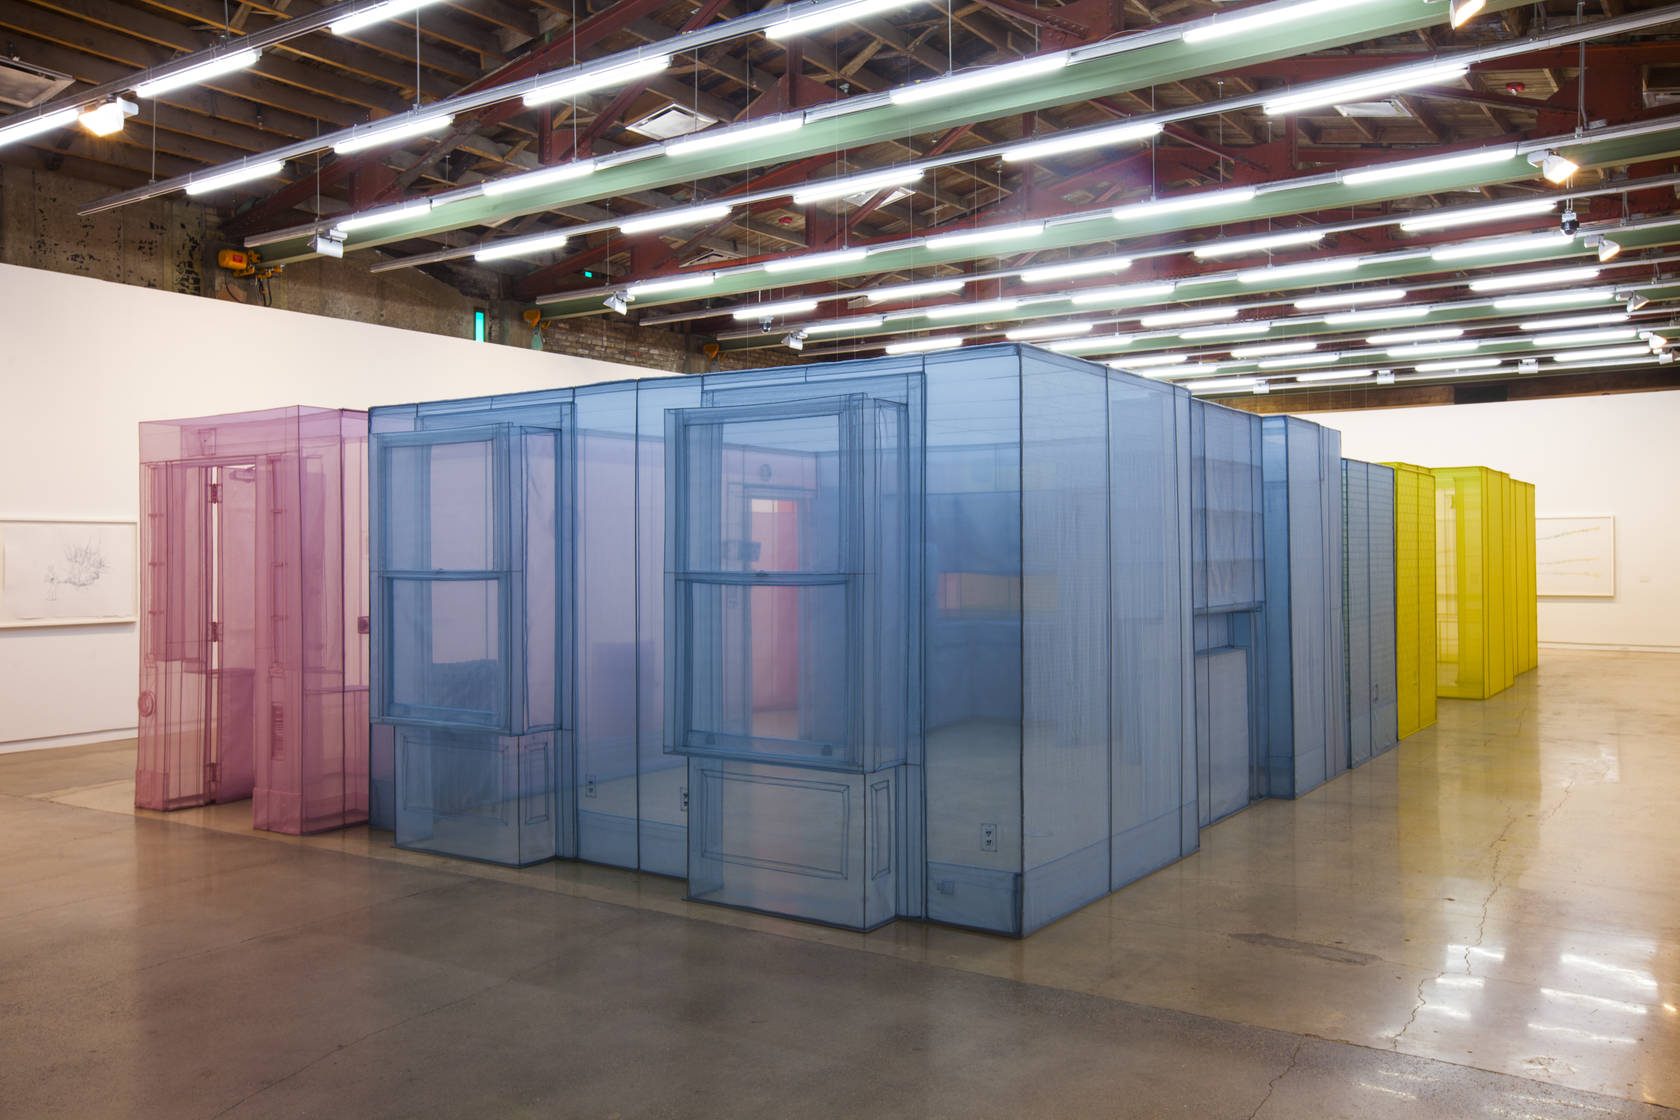 Installation view of Do Ho Suh at The Contemporary Austin